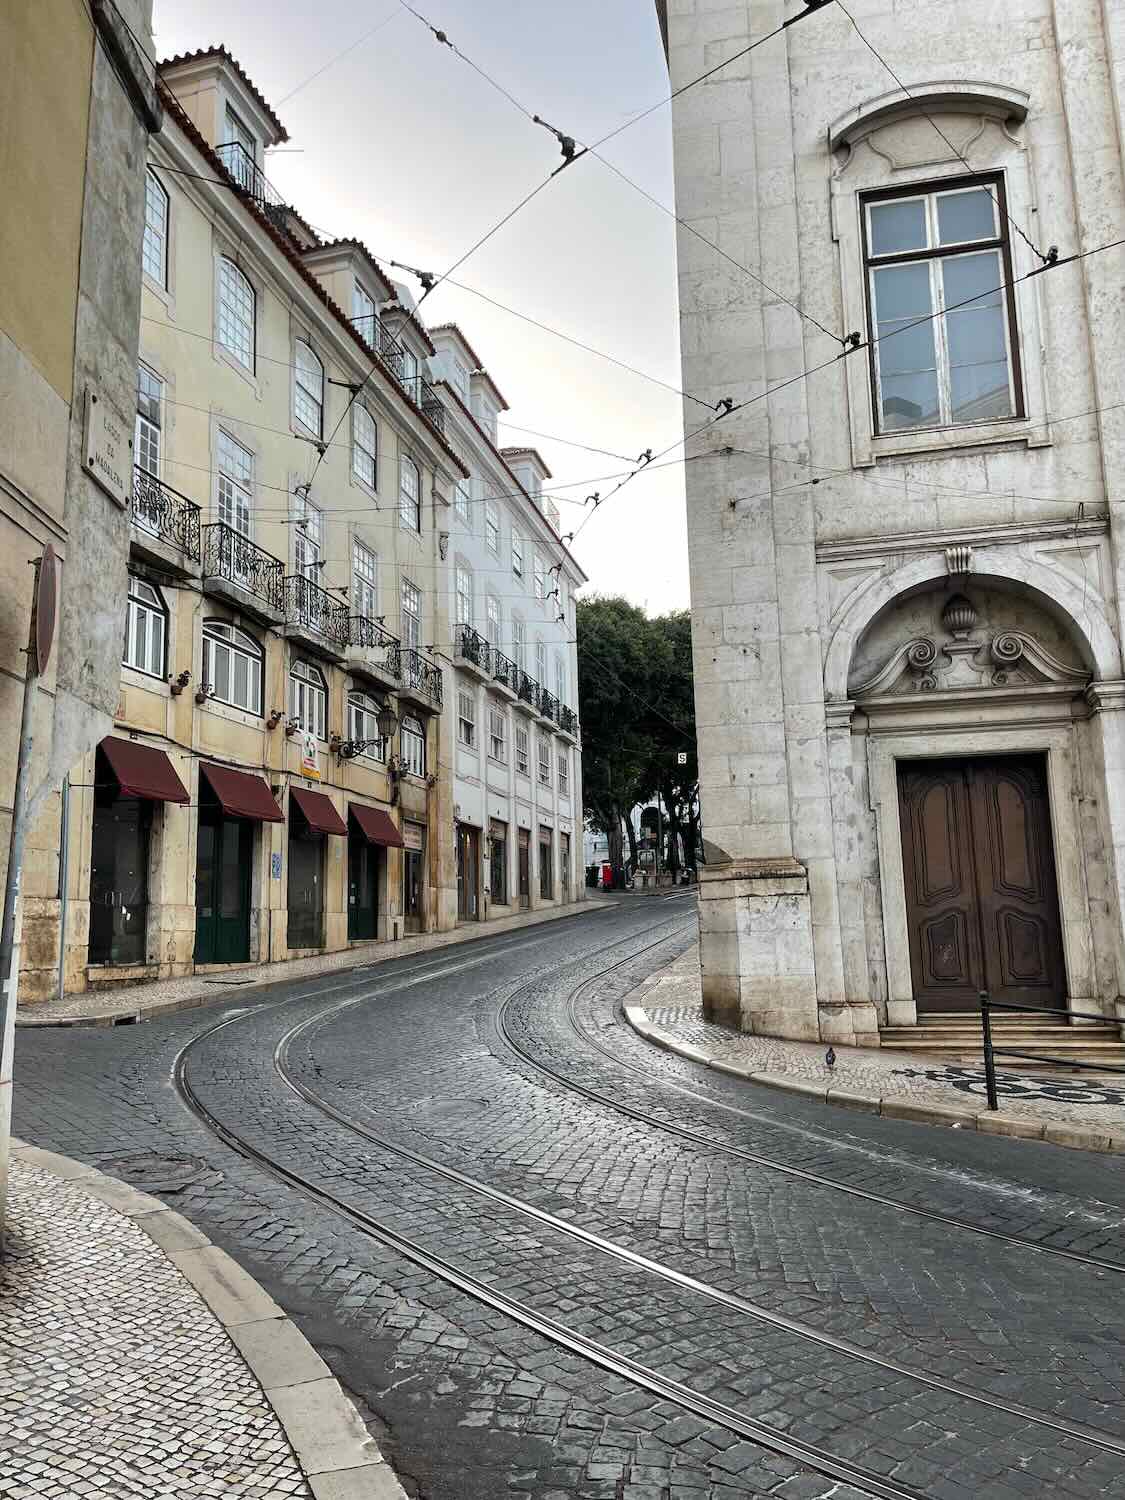 A serene morning view of the empty, curving streets in Lisbon, characterized by traditional architecture and tram lines, evoking a sense of tranquility.